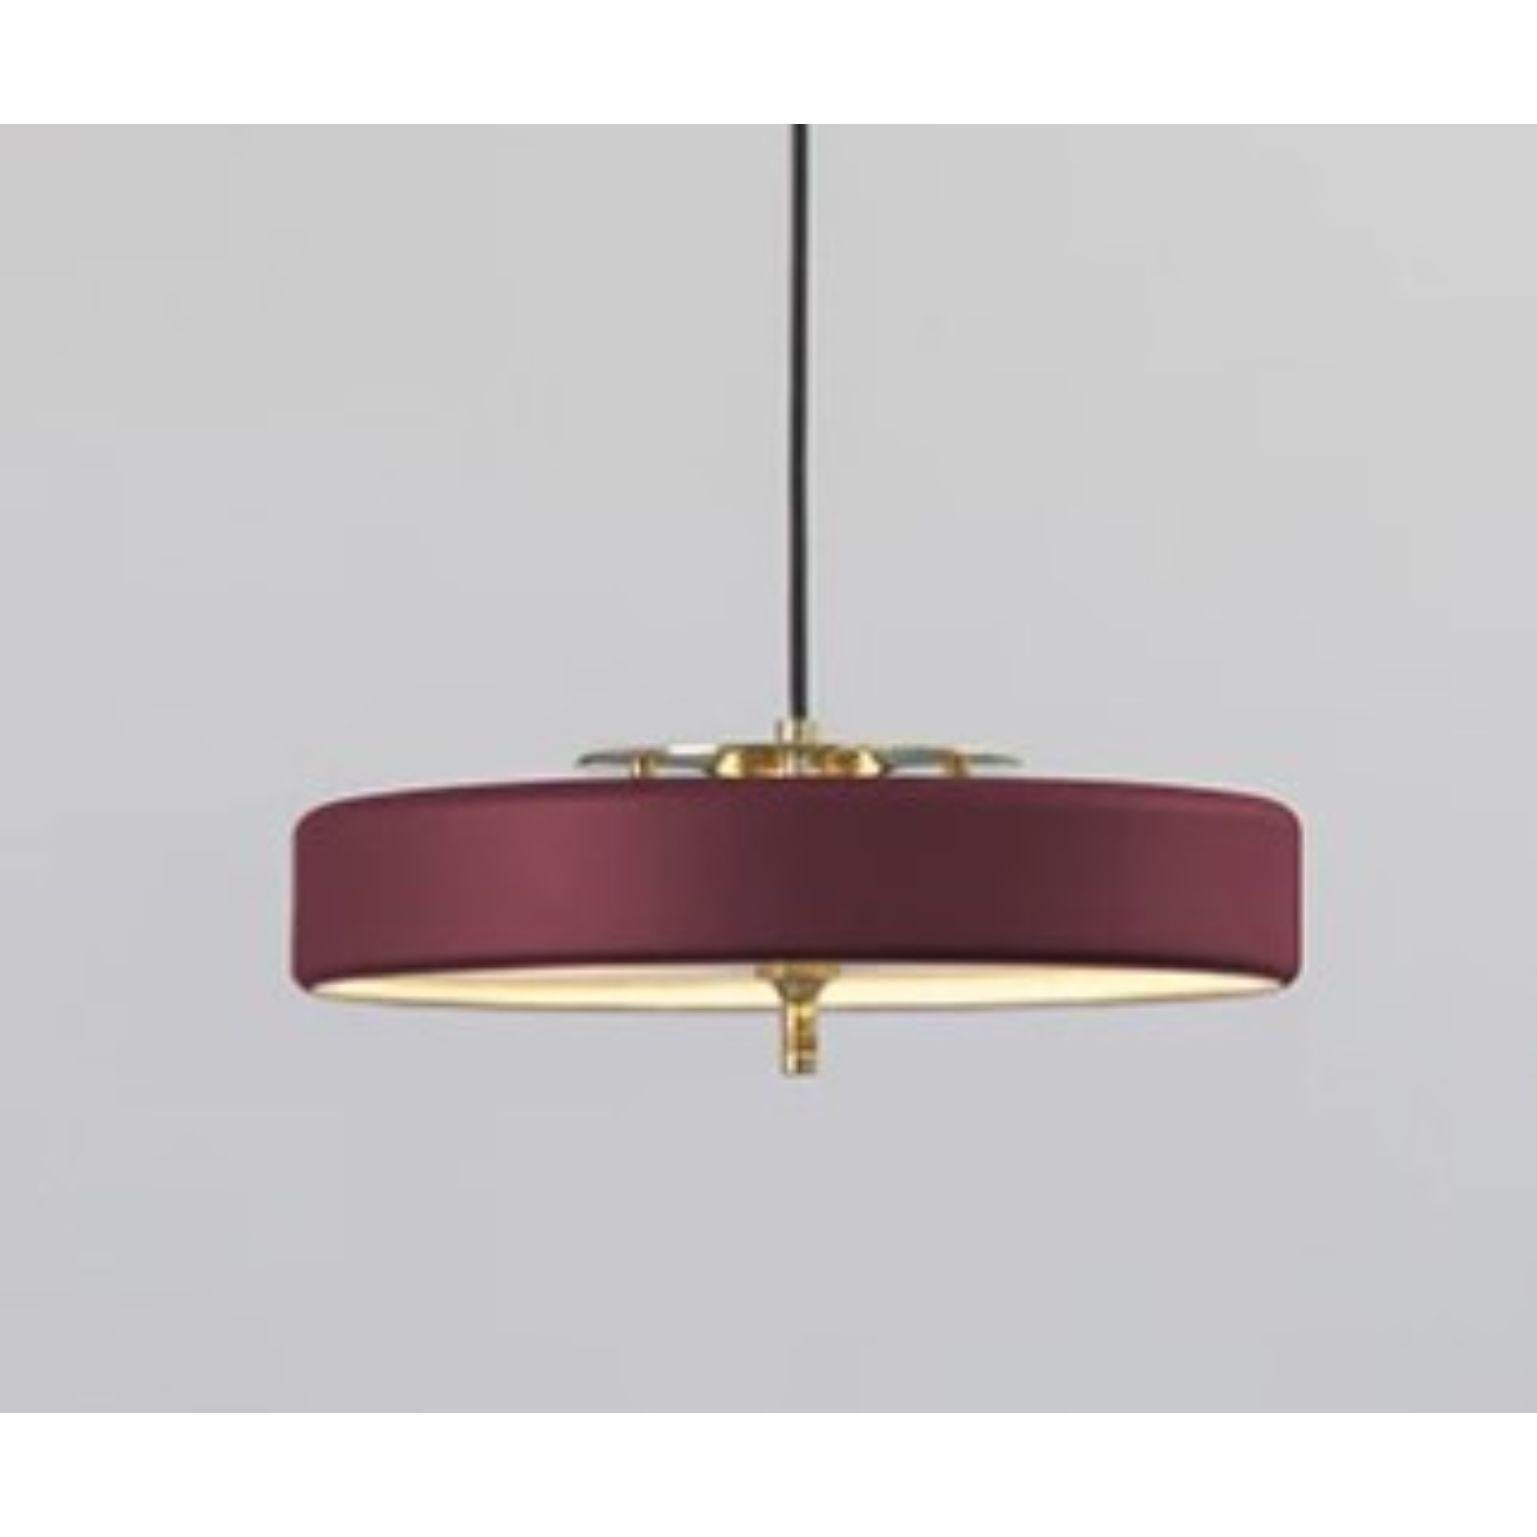 Contemporary Revolve Rise and Fall Pendant Light, Polished Brass, Oxblood by Bert Frank